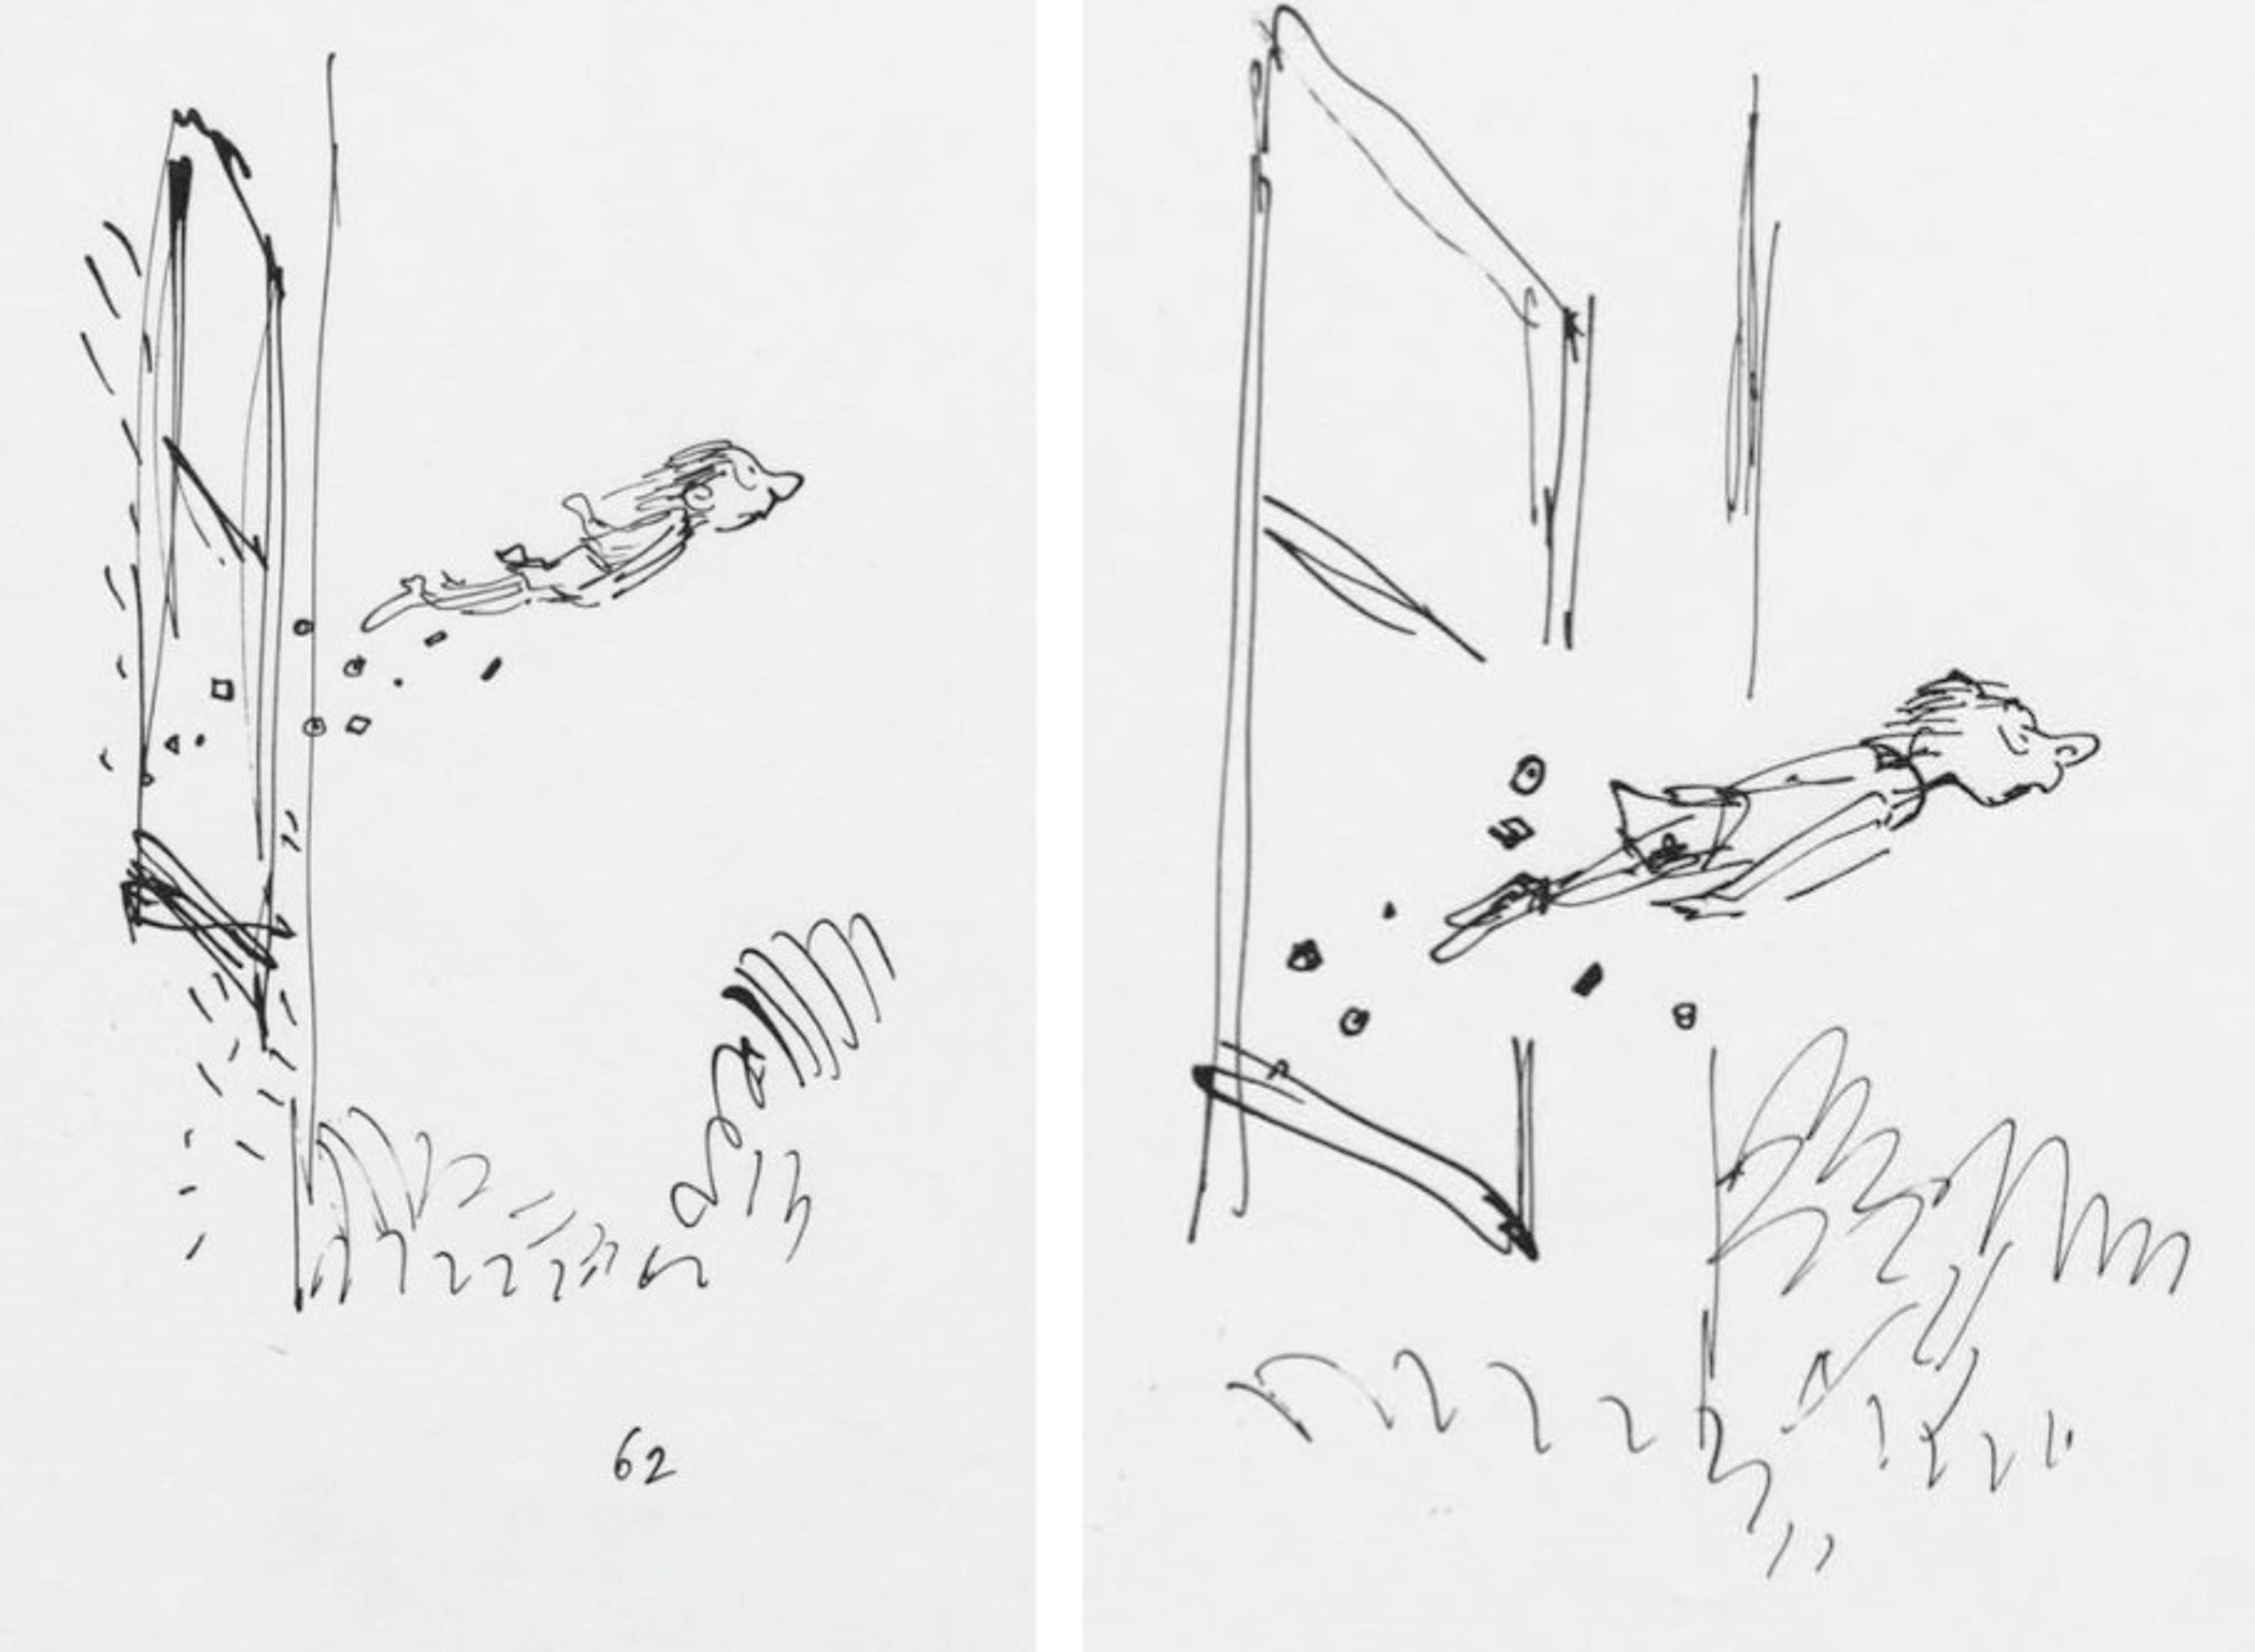 Two preliminary sketches of a child flying out of the window